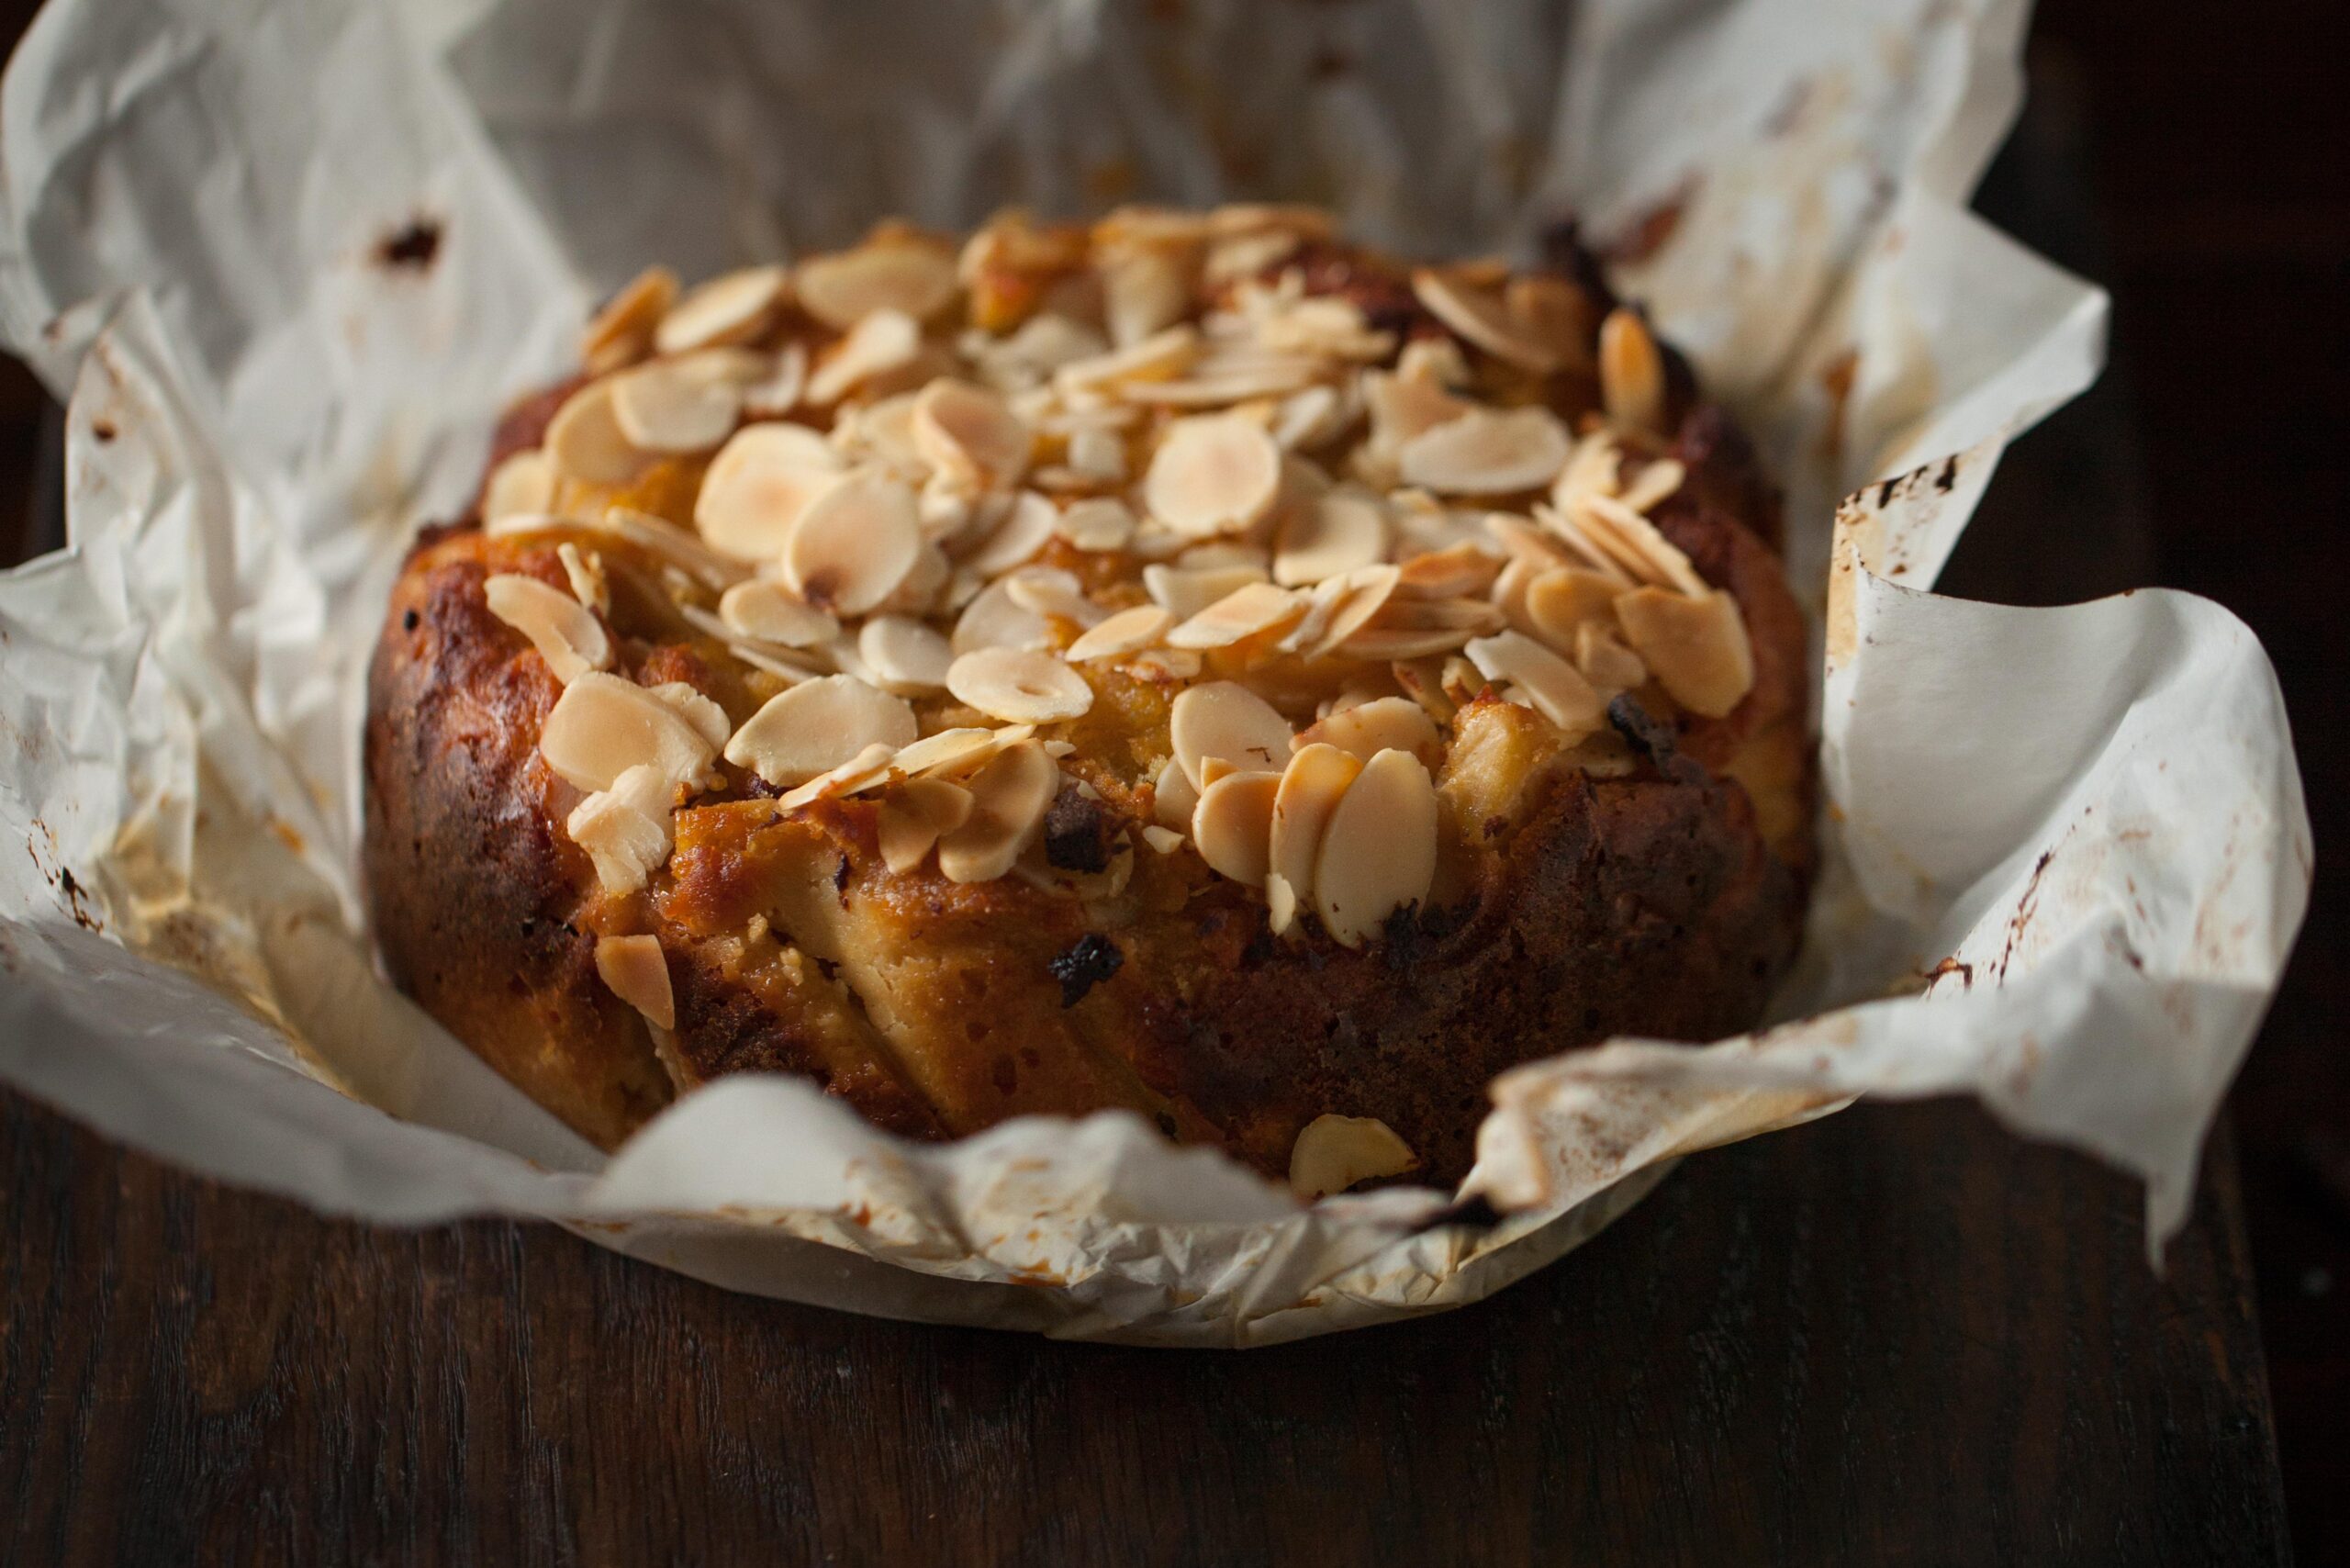  A slice of heaven: Gluten-free, dairy-free, and organic apple nut cake